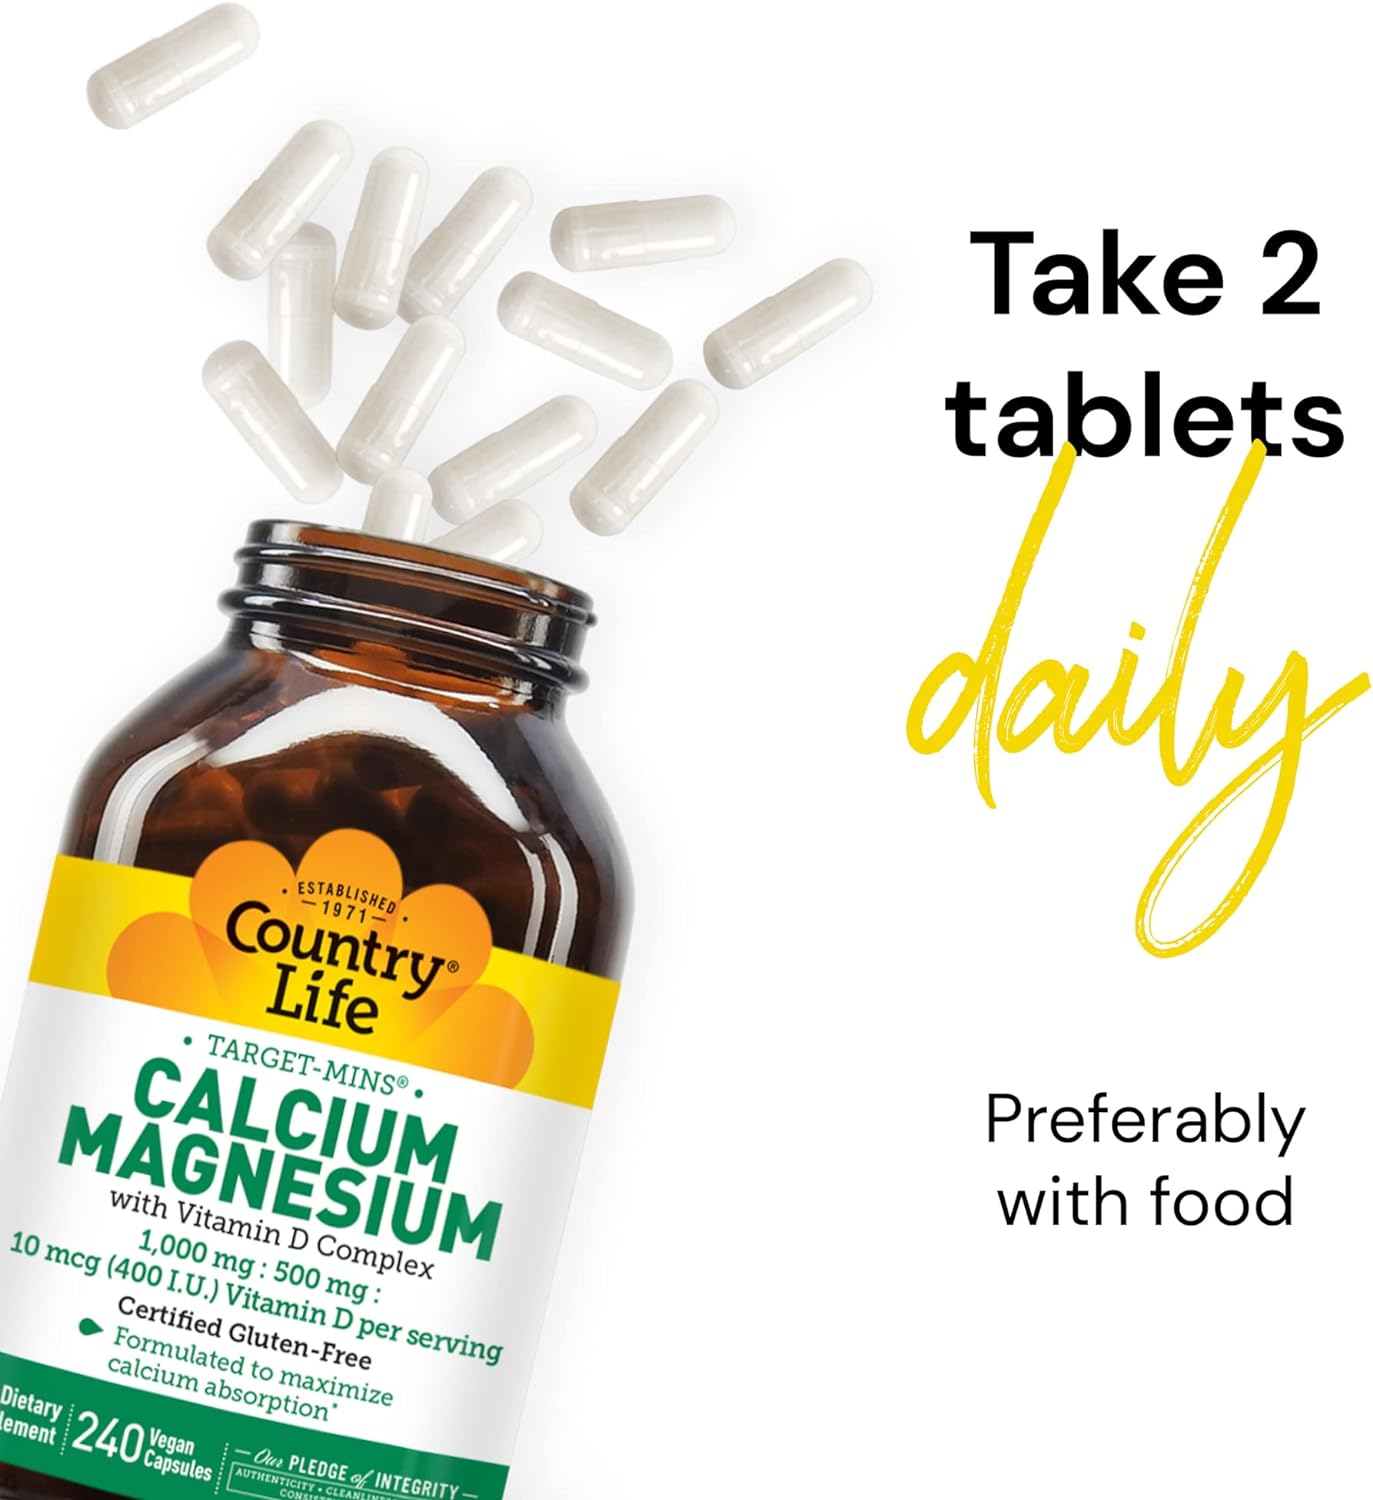 Country Life Target-Mins Calcium Magnesium with Vitamin D-Complex, 1000mg/500mg/10mcg, 240 Vegan Capsules, Certified Gluten Free, Certified Vegan, Verified Non-GMO Verified : Health & Household